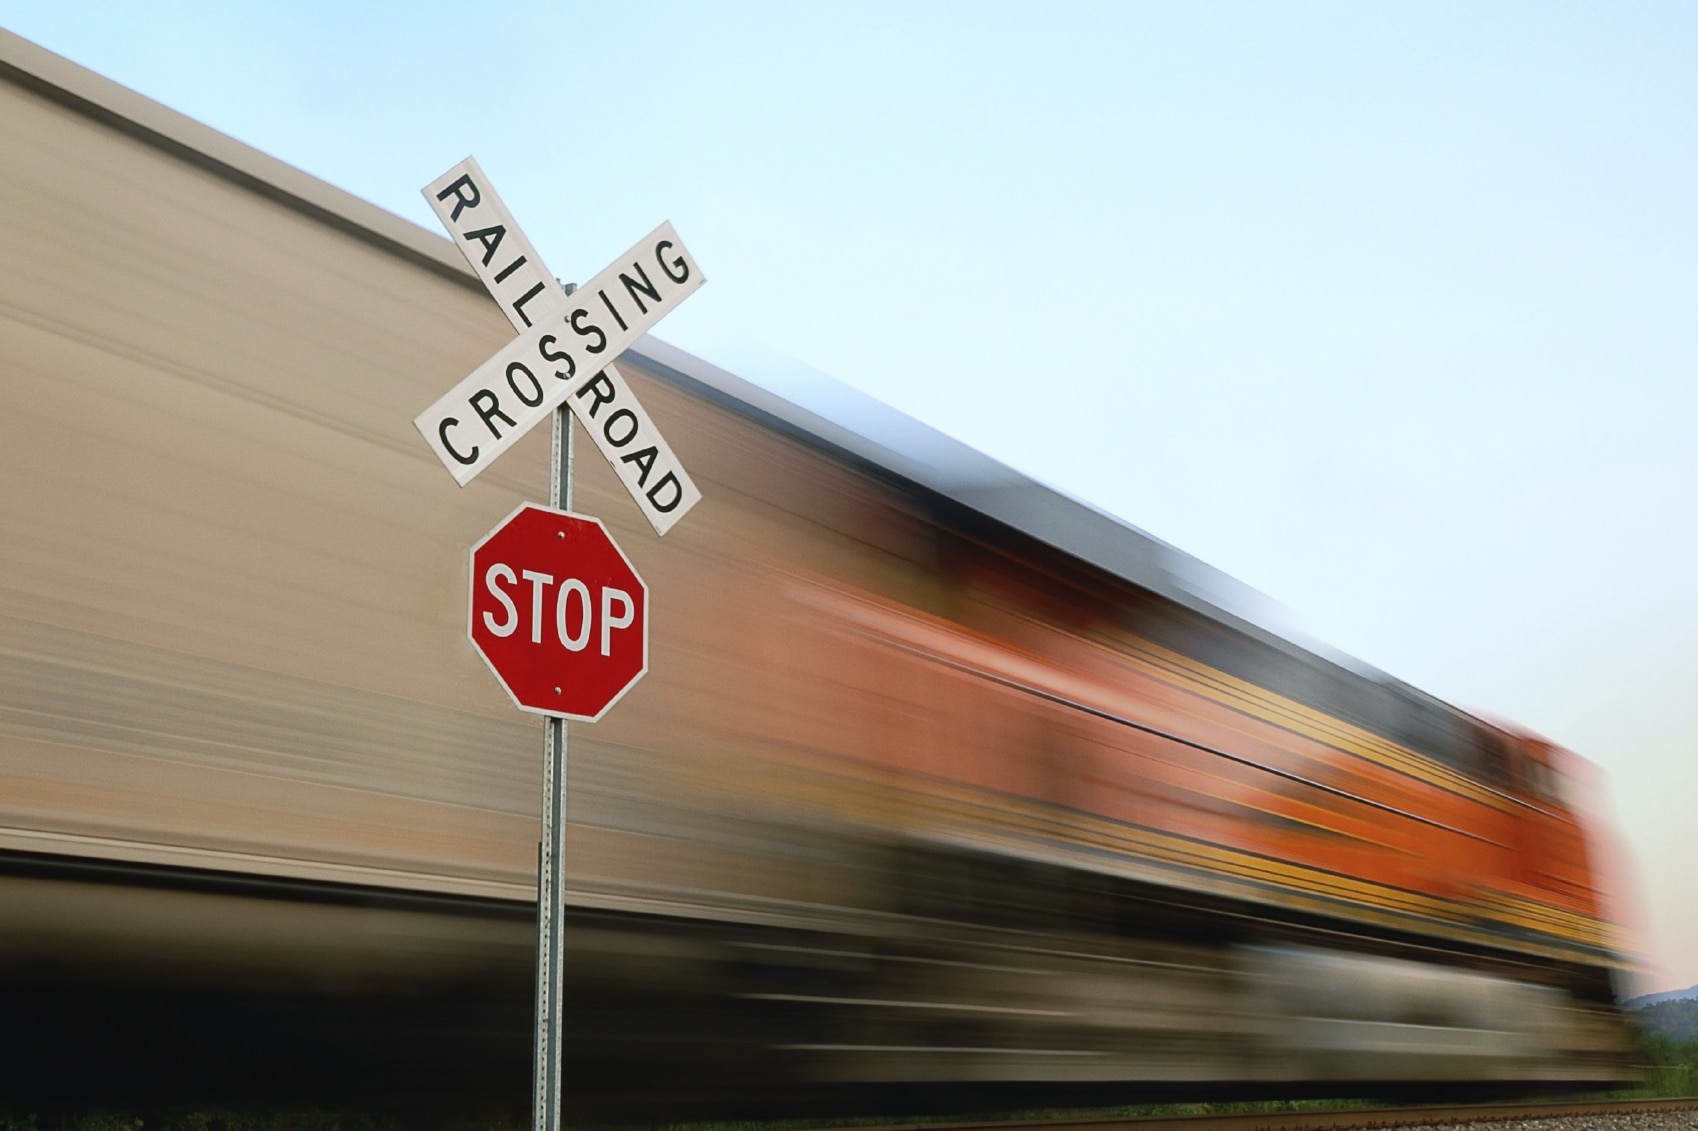 Auto Accident Lawyers Encourage Safety at Railroad Crossings